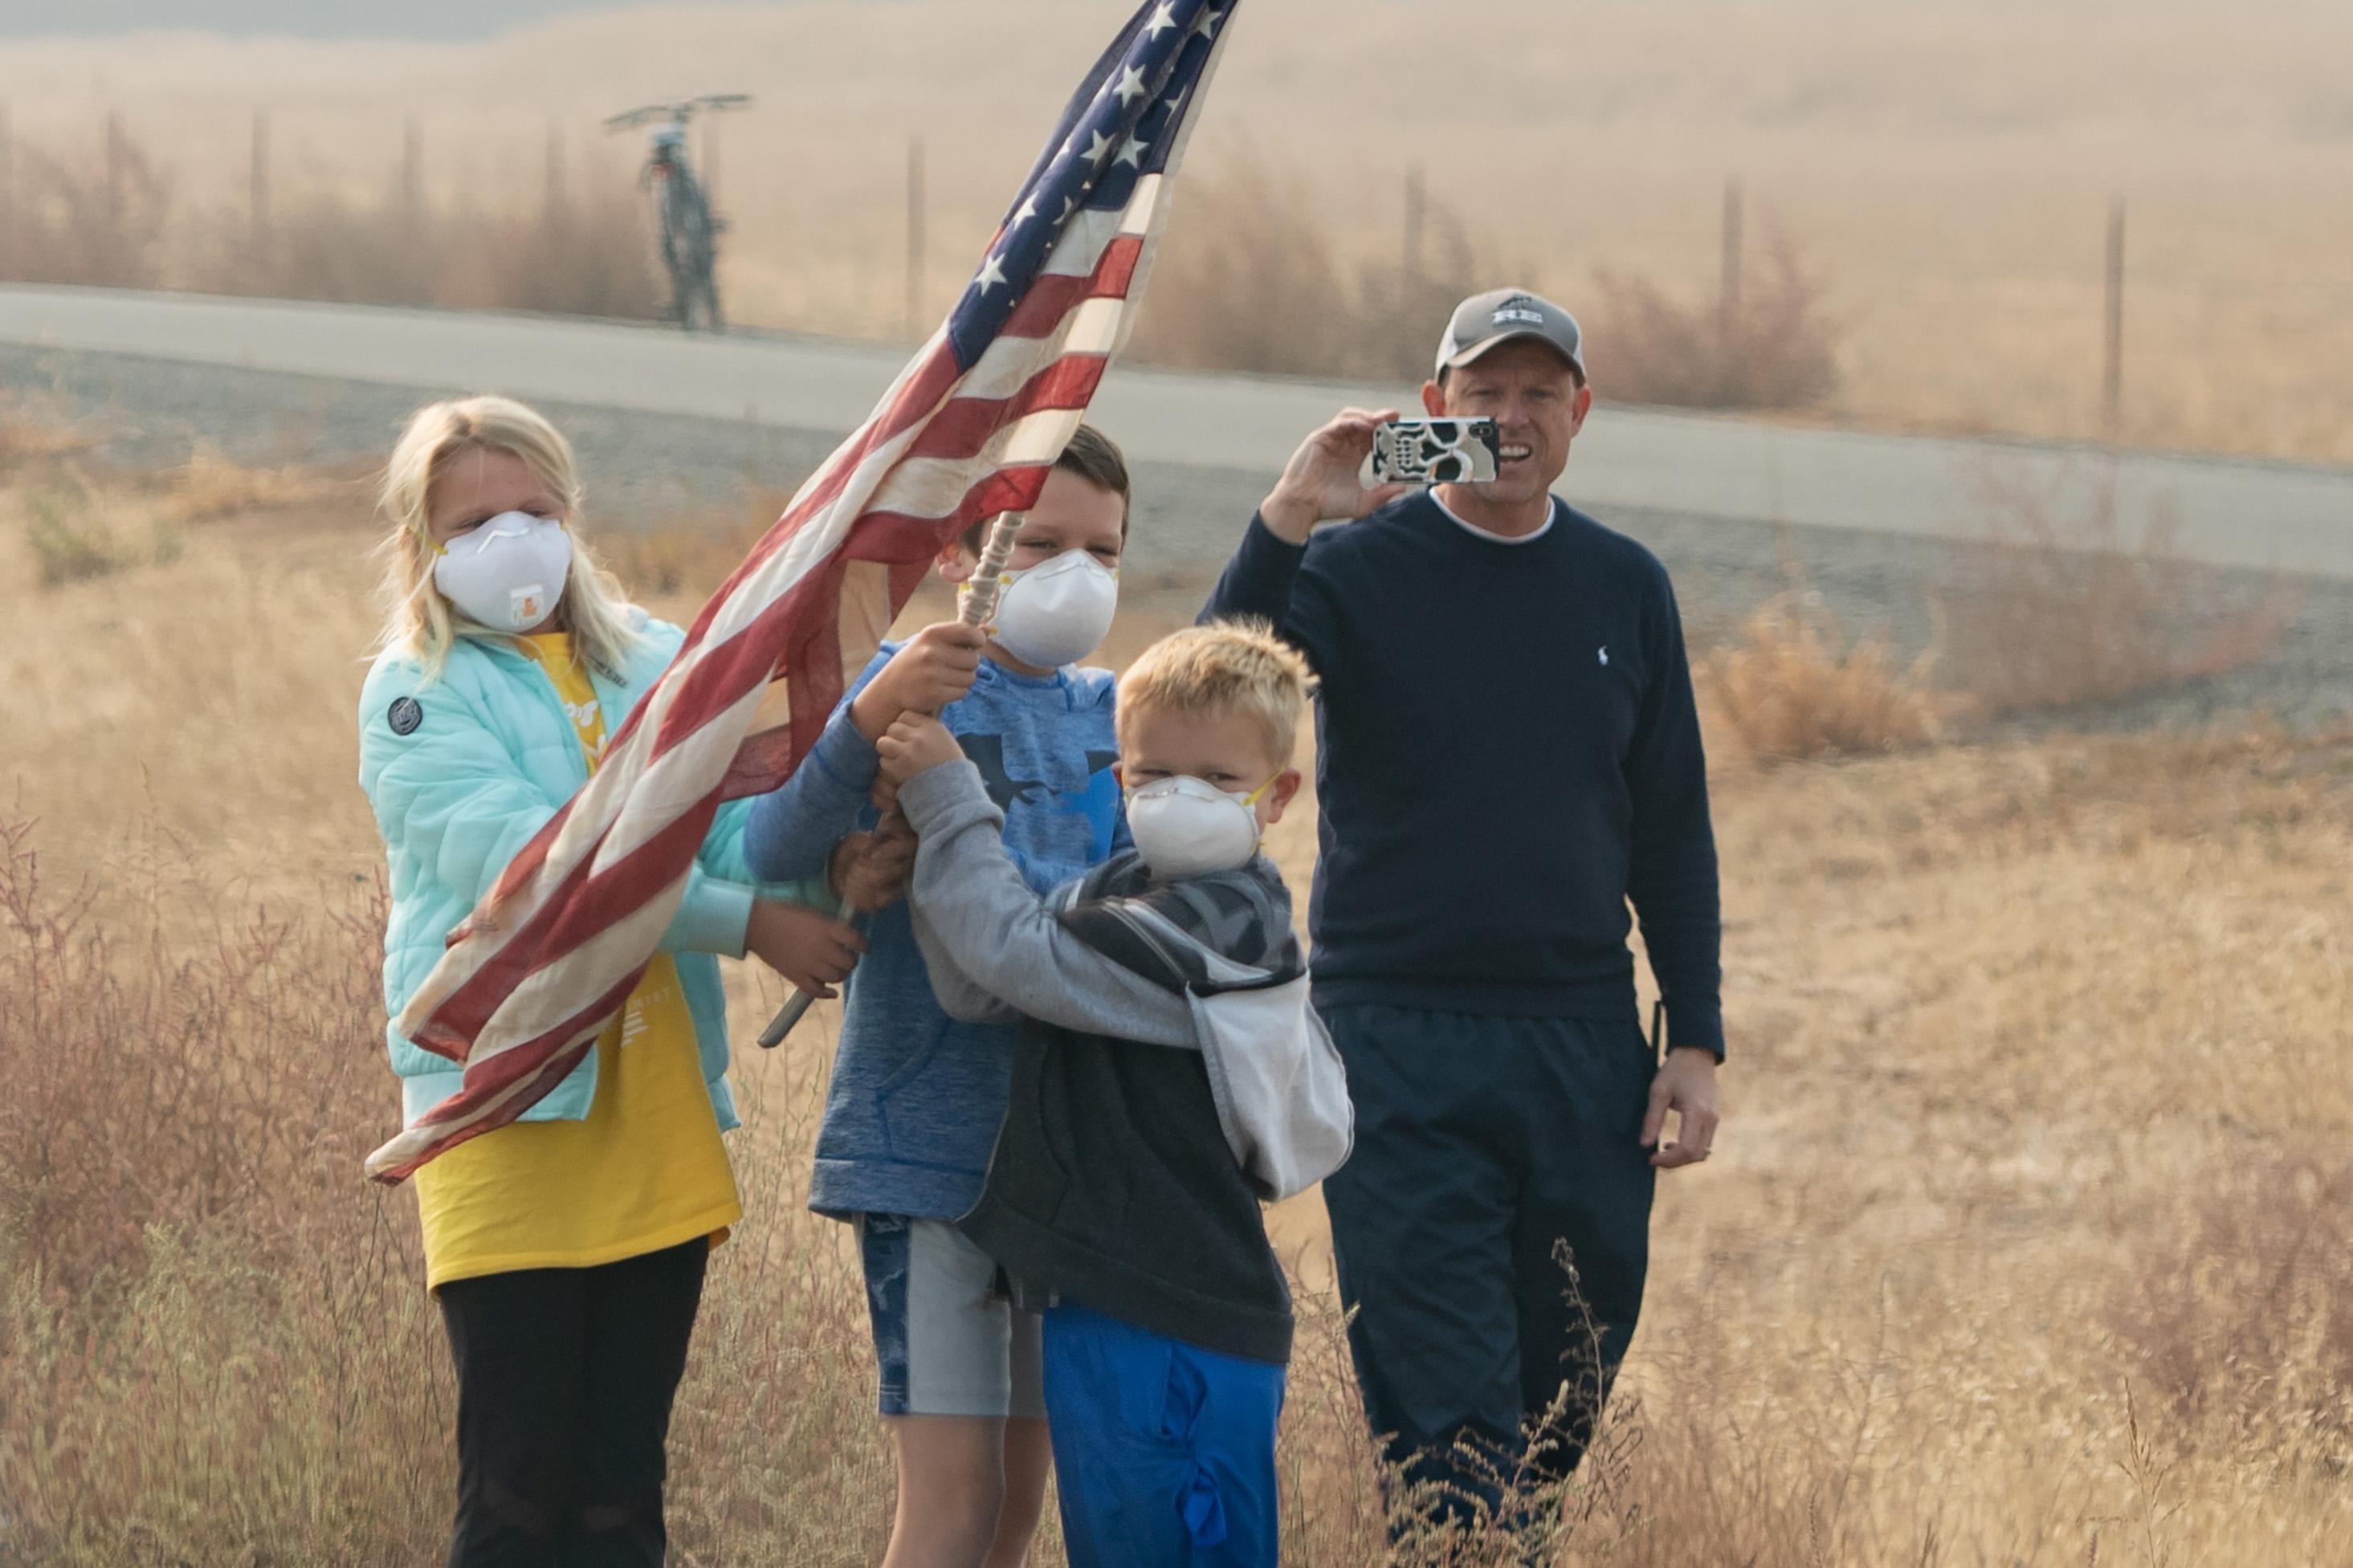 Three children wearing white N95 masks hold up an American flag while a man stands behind them smiling and holding up a phone to take a picture or video.